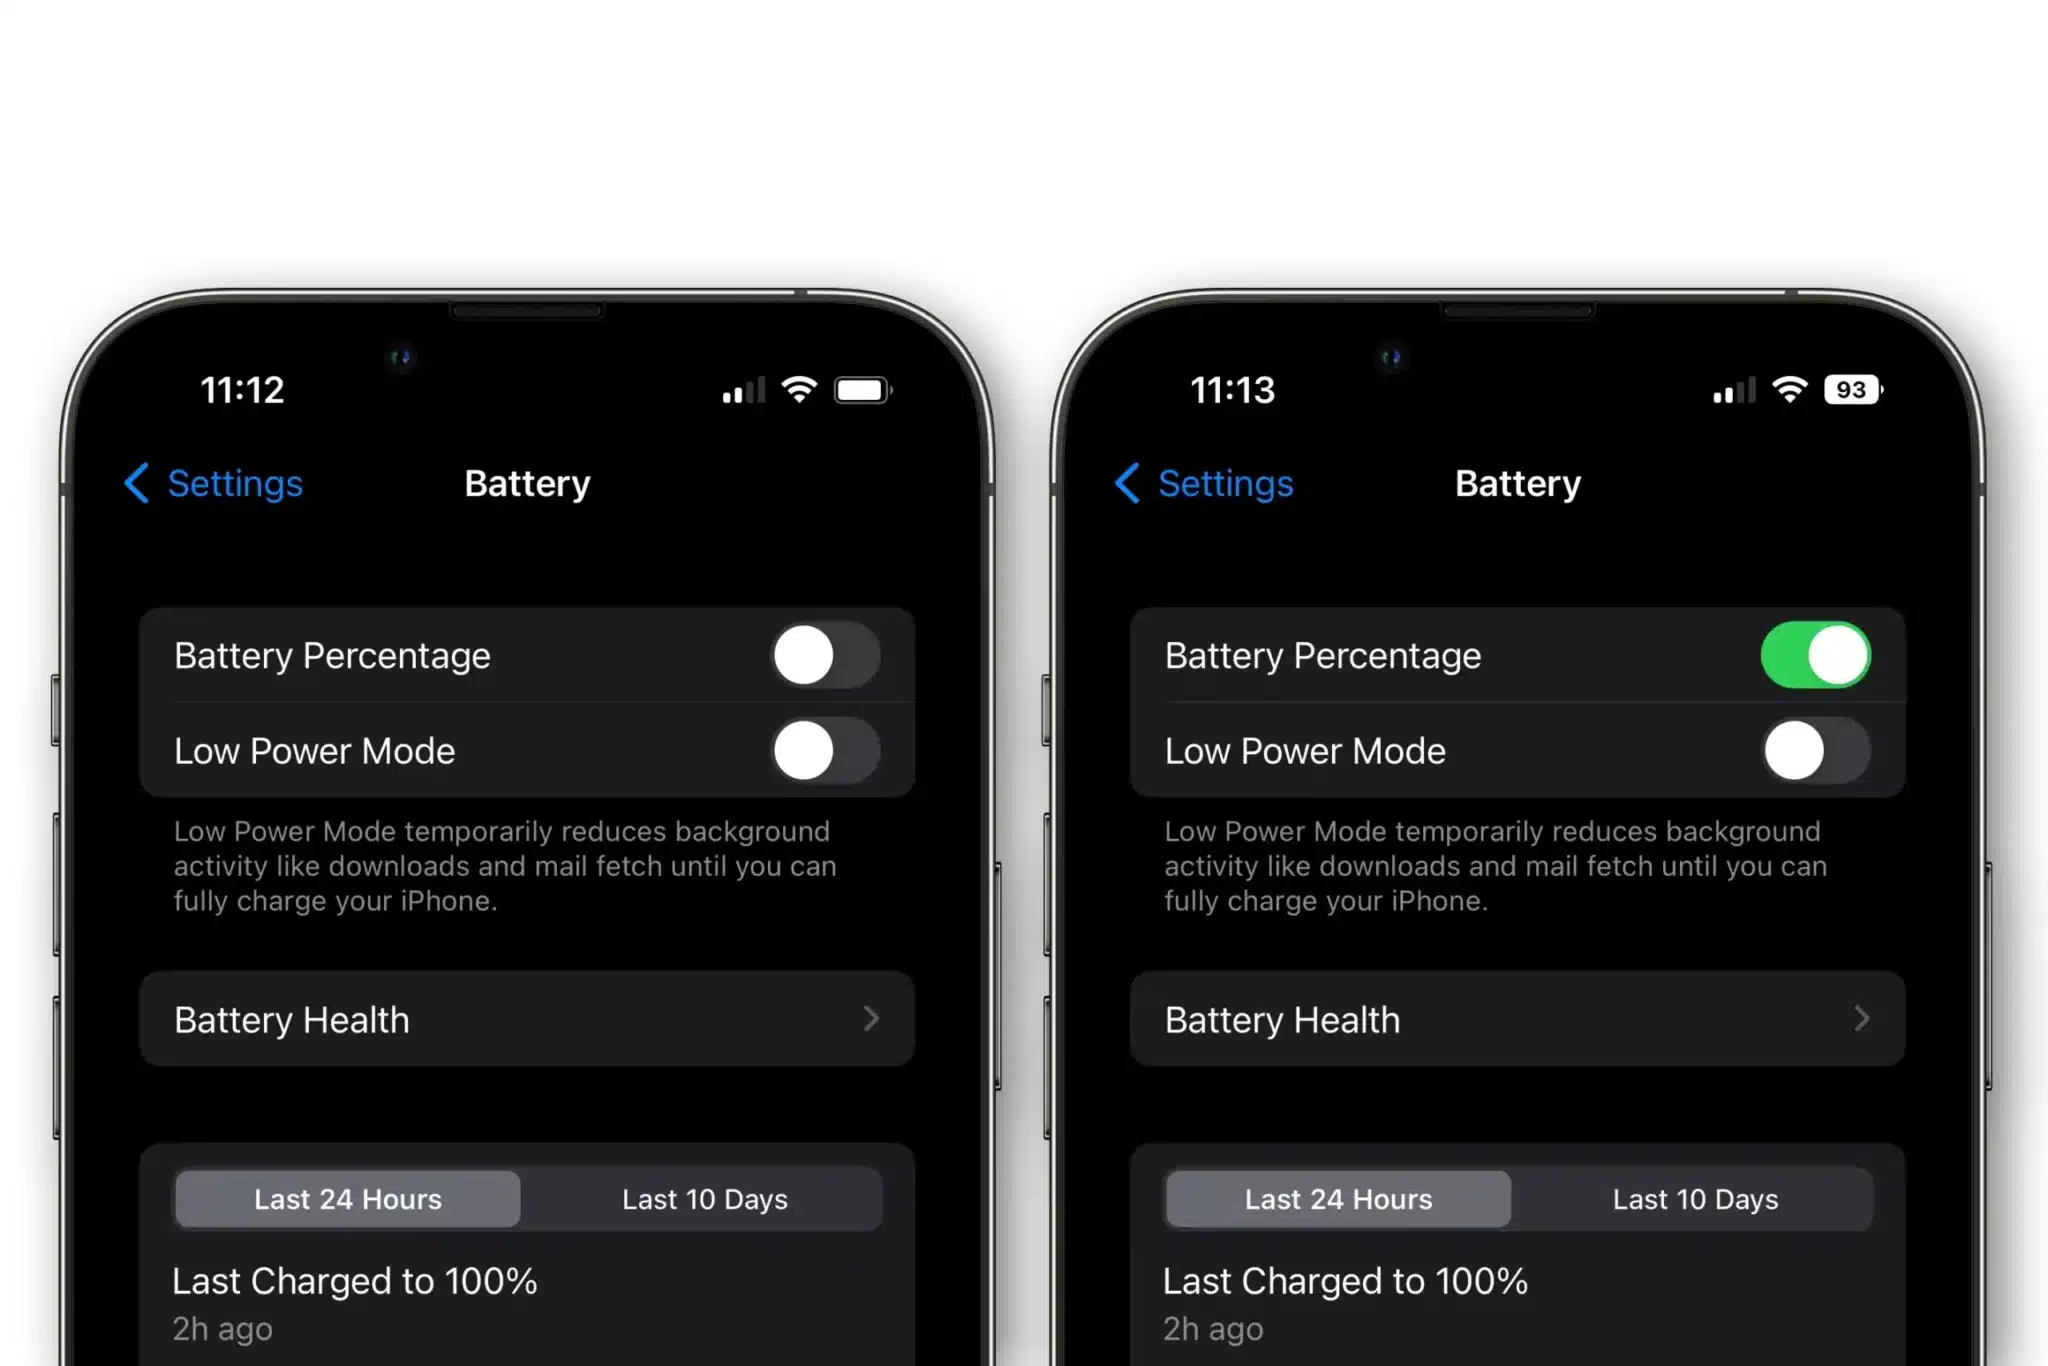 ios16 battery status side by side.jpg scaled